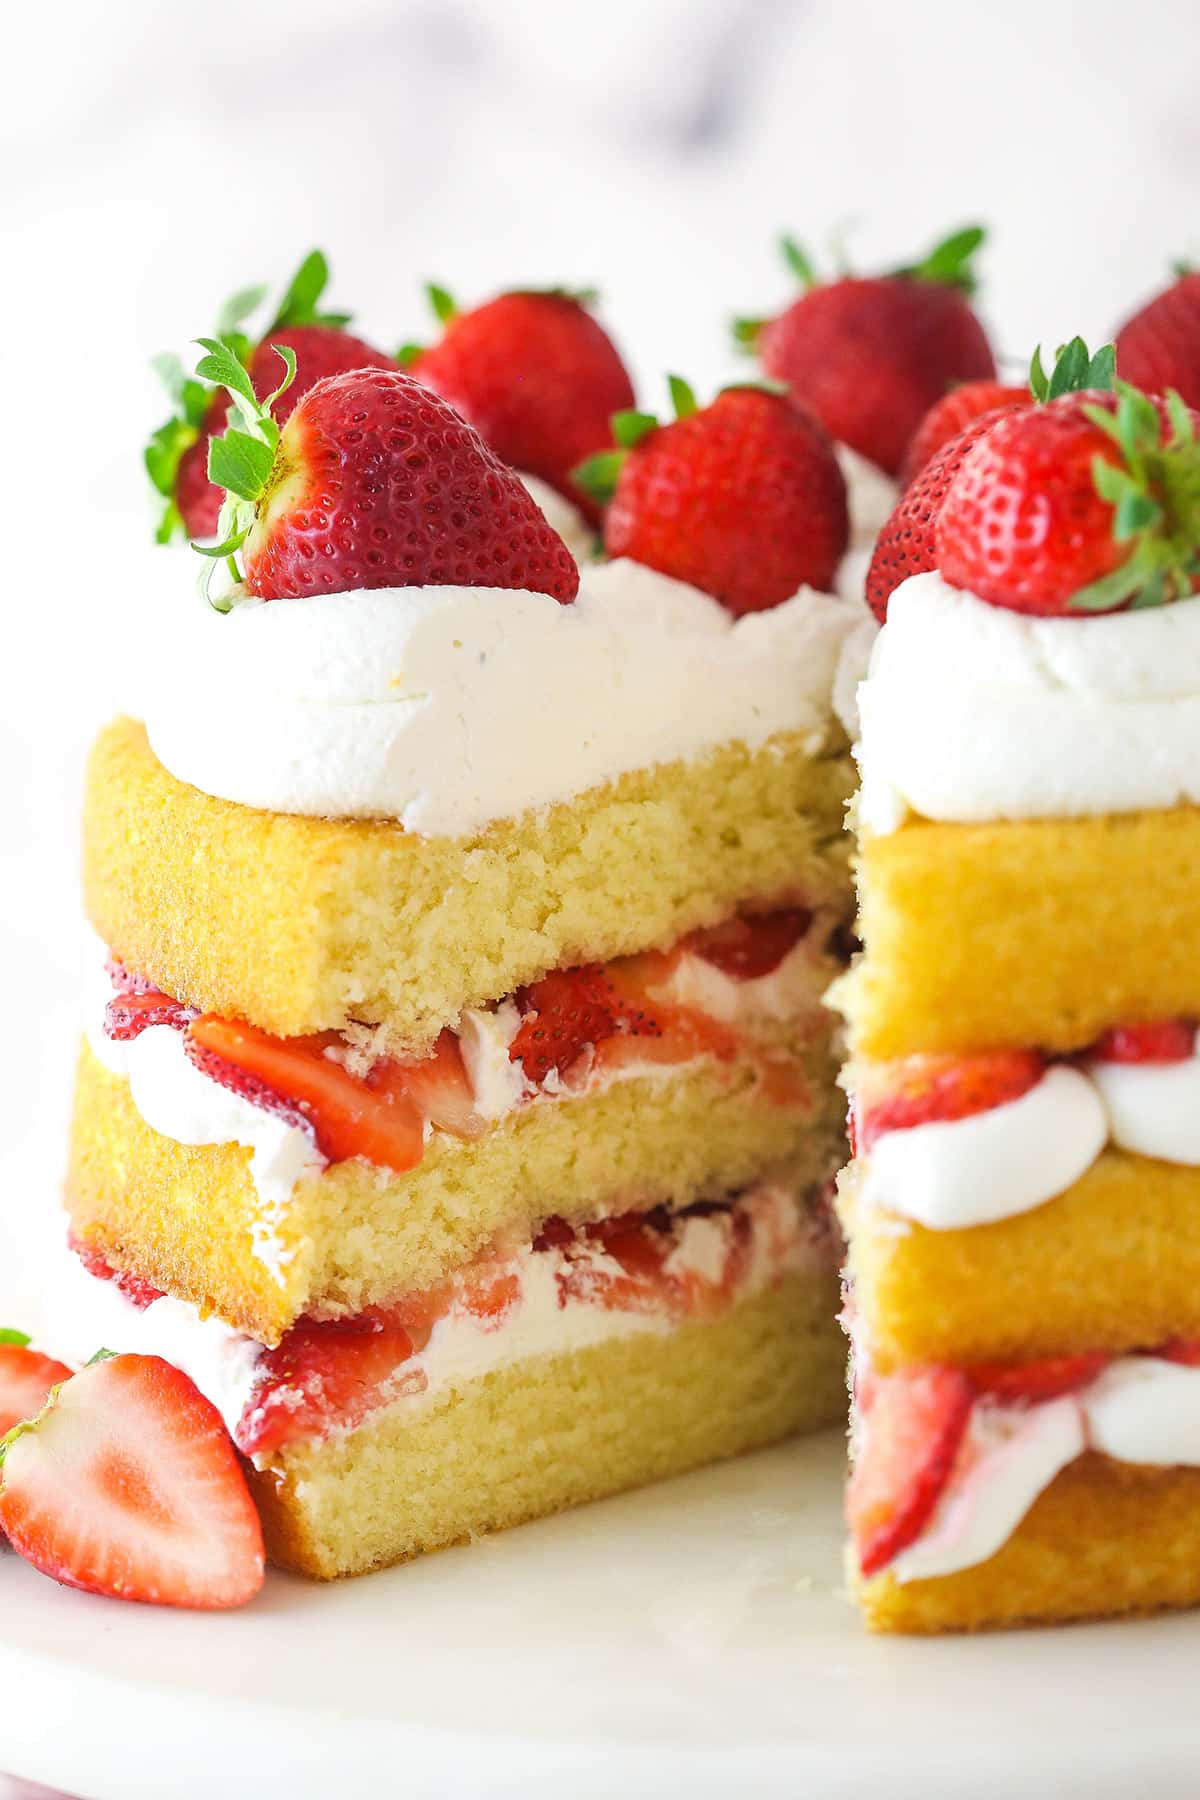 Strawberry shortcake cake with a slice taken out of it.